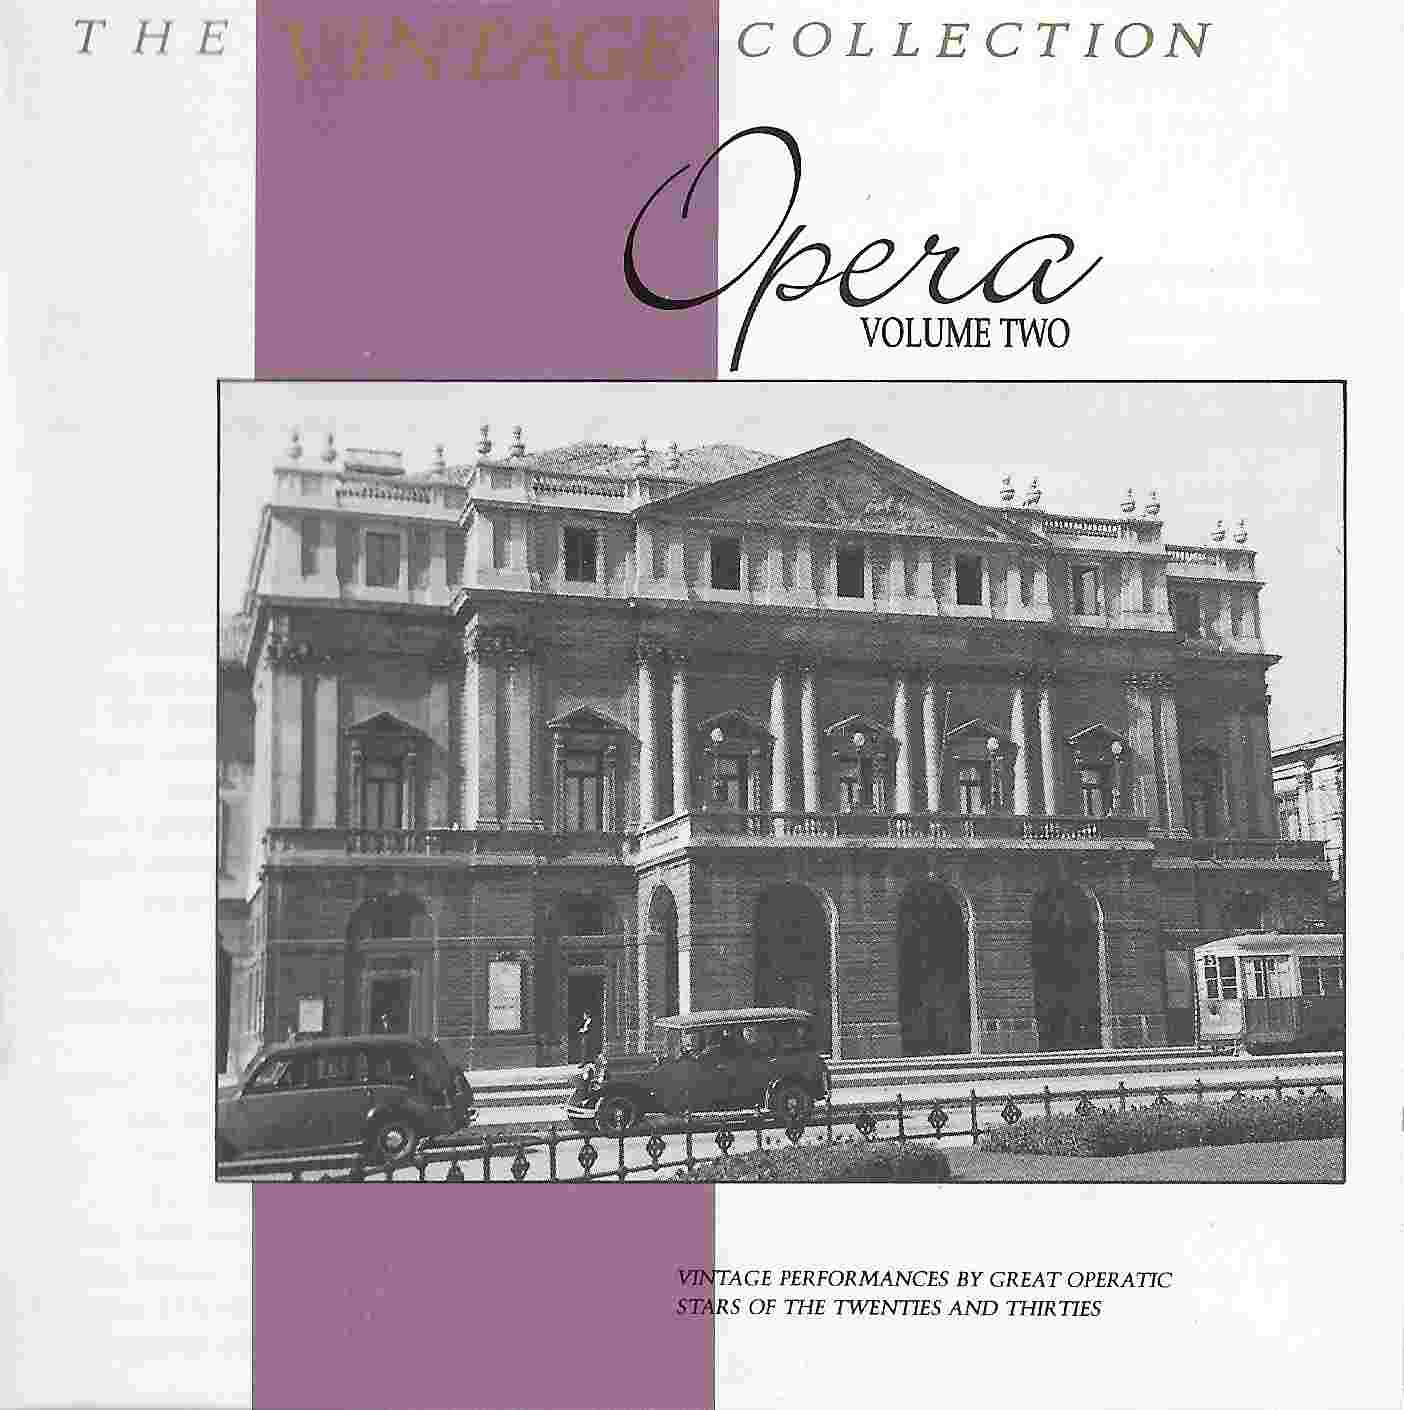 Picture of The vintage collection - Opera II by artist Various from the BBC cds - Records and Tapes library